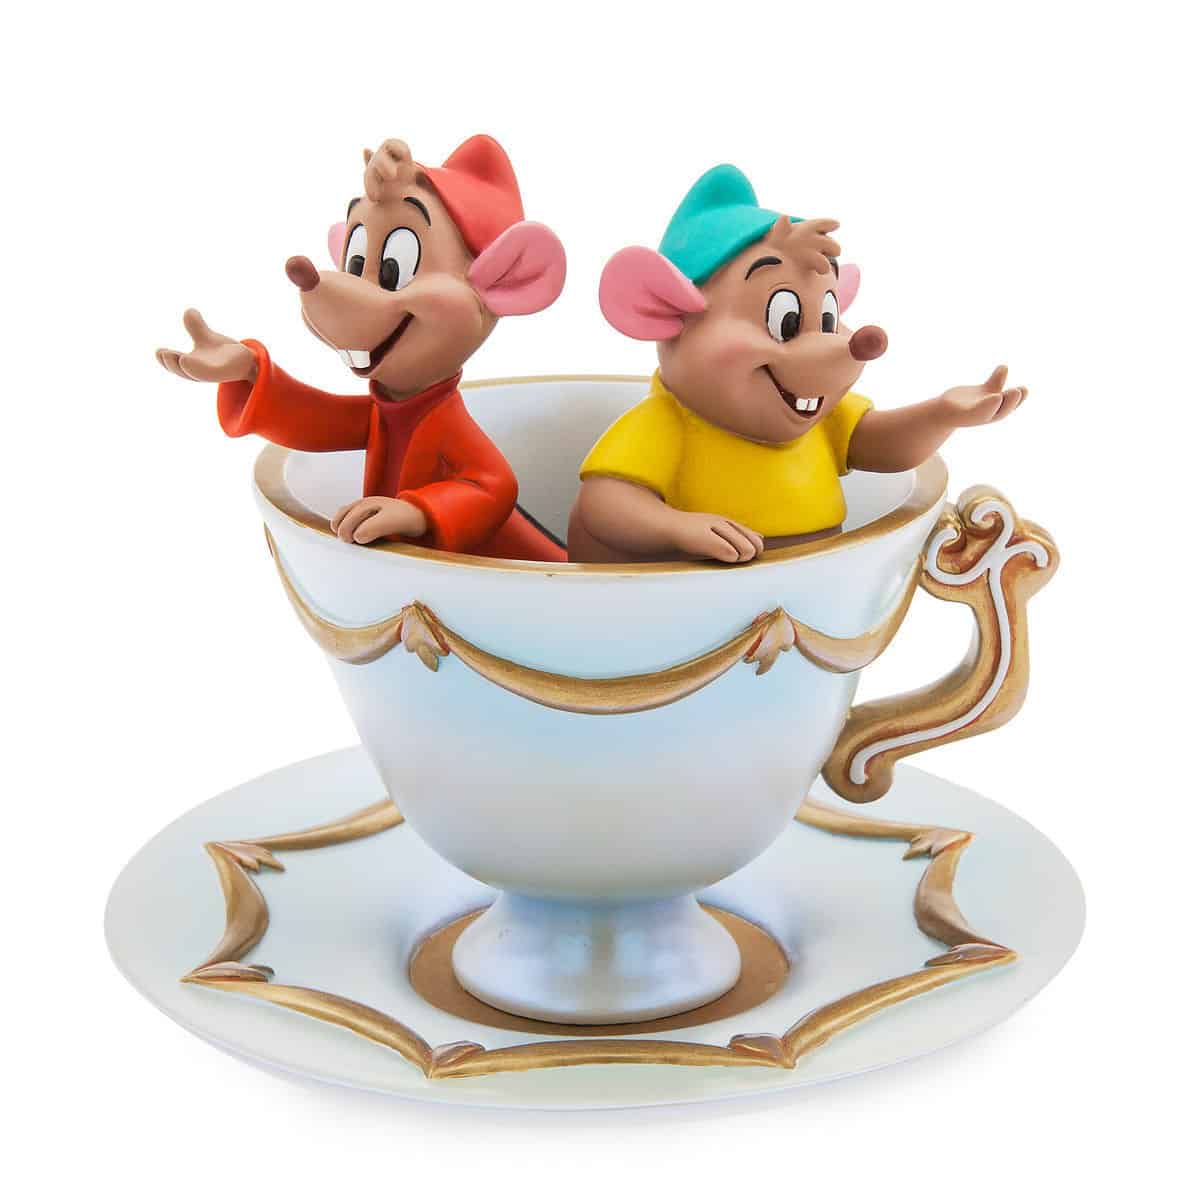 Shop New Disney Desk Accessories Featuring Characters From